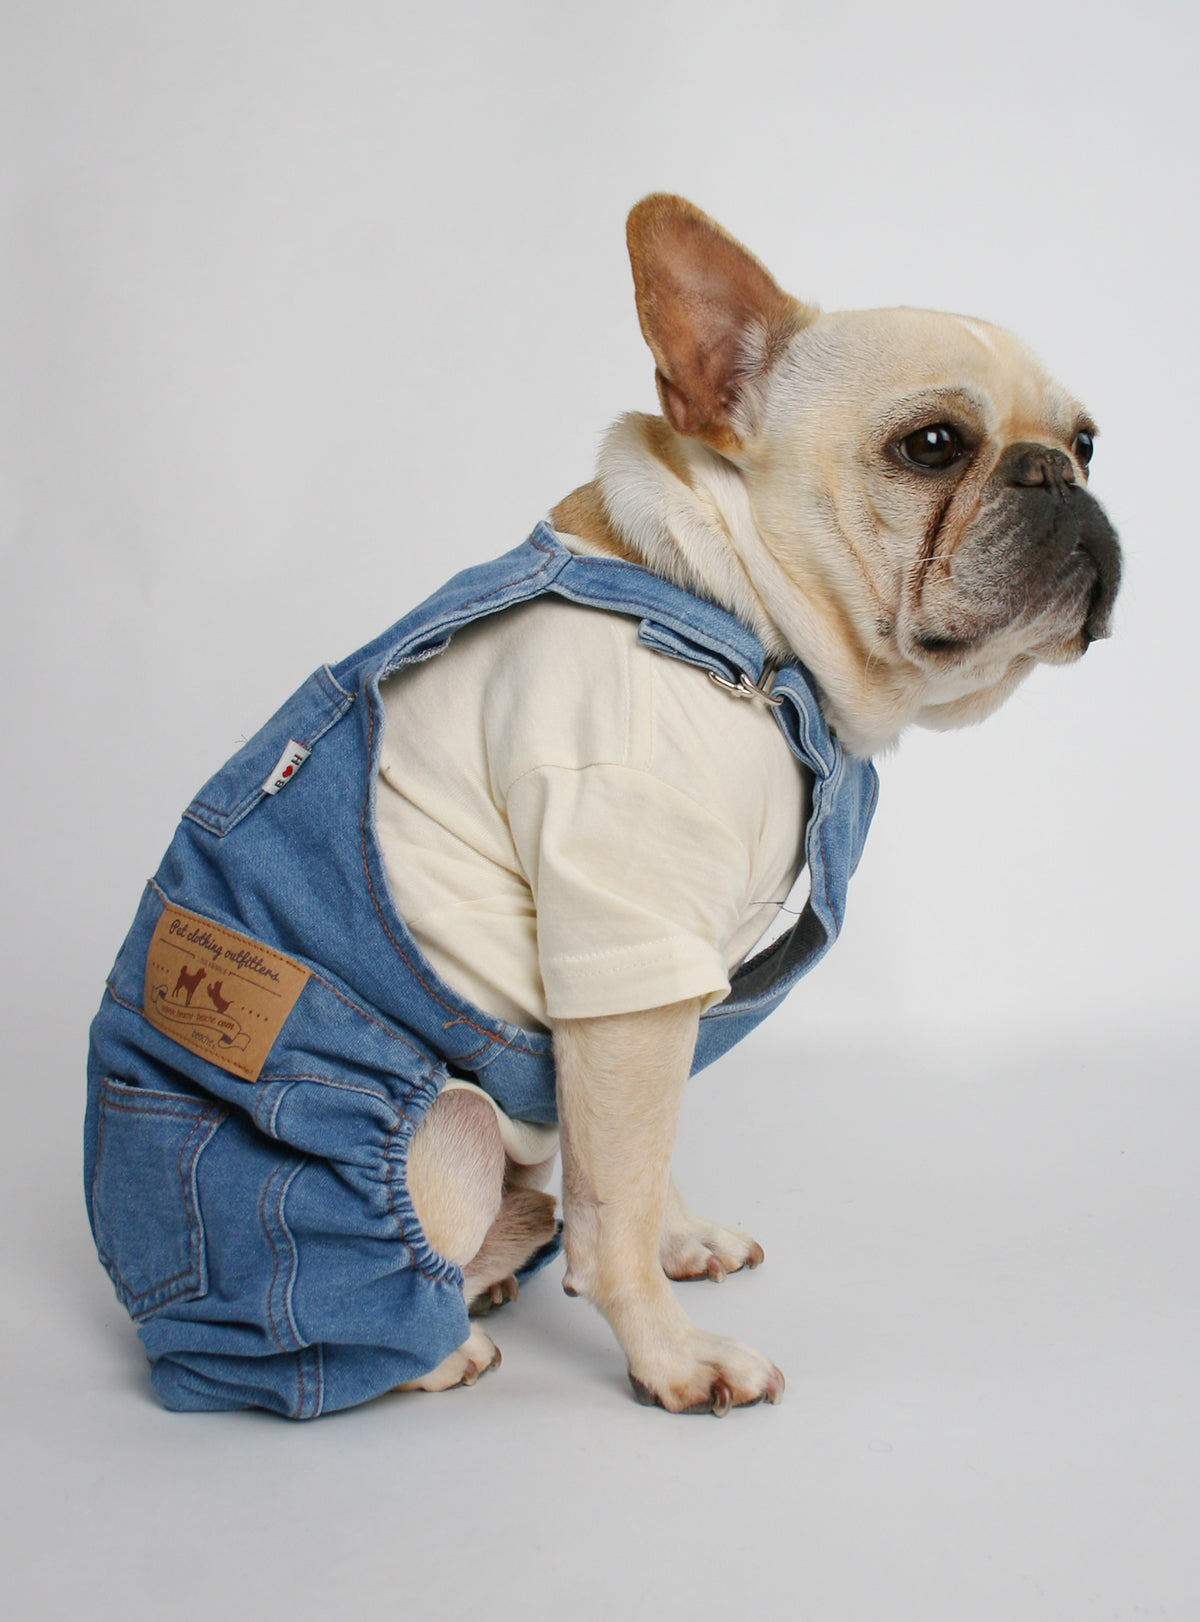 Pet Clothes Costume Puppy Denim Overalls for Small Medium Dogs Cats Boys  Bowtie Plaid Shirt Jeans Pants Outfits Chihuahua One Piece Jumpsuit - M -  Walmart.com